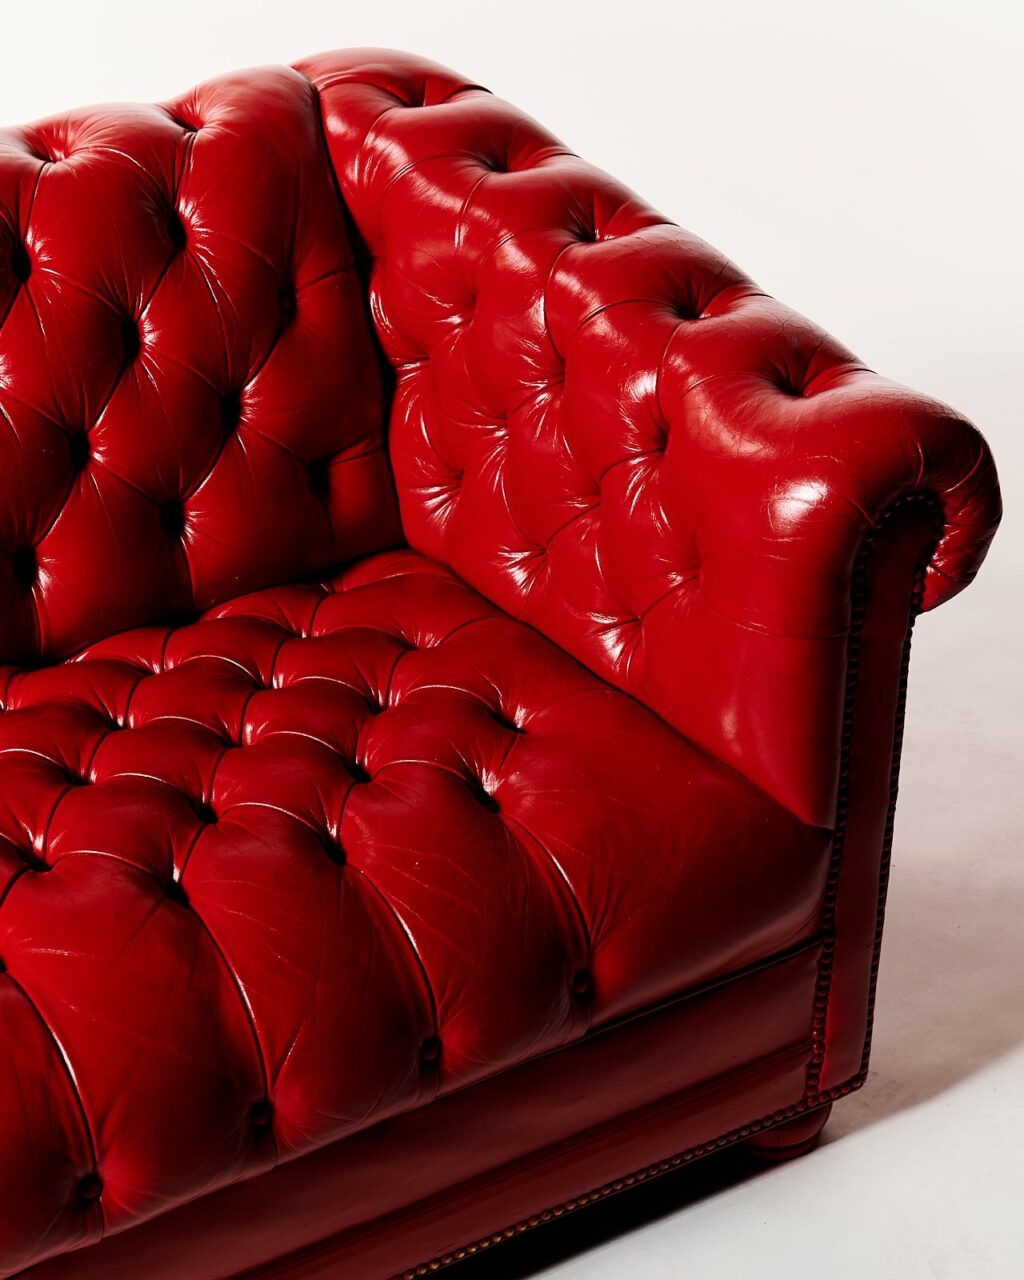 red leather living room furniture